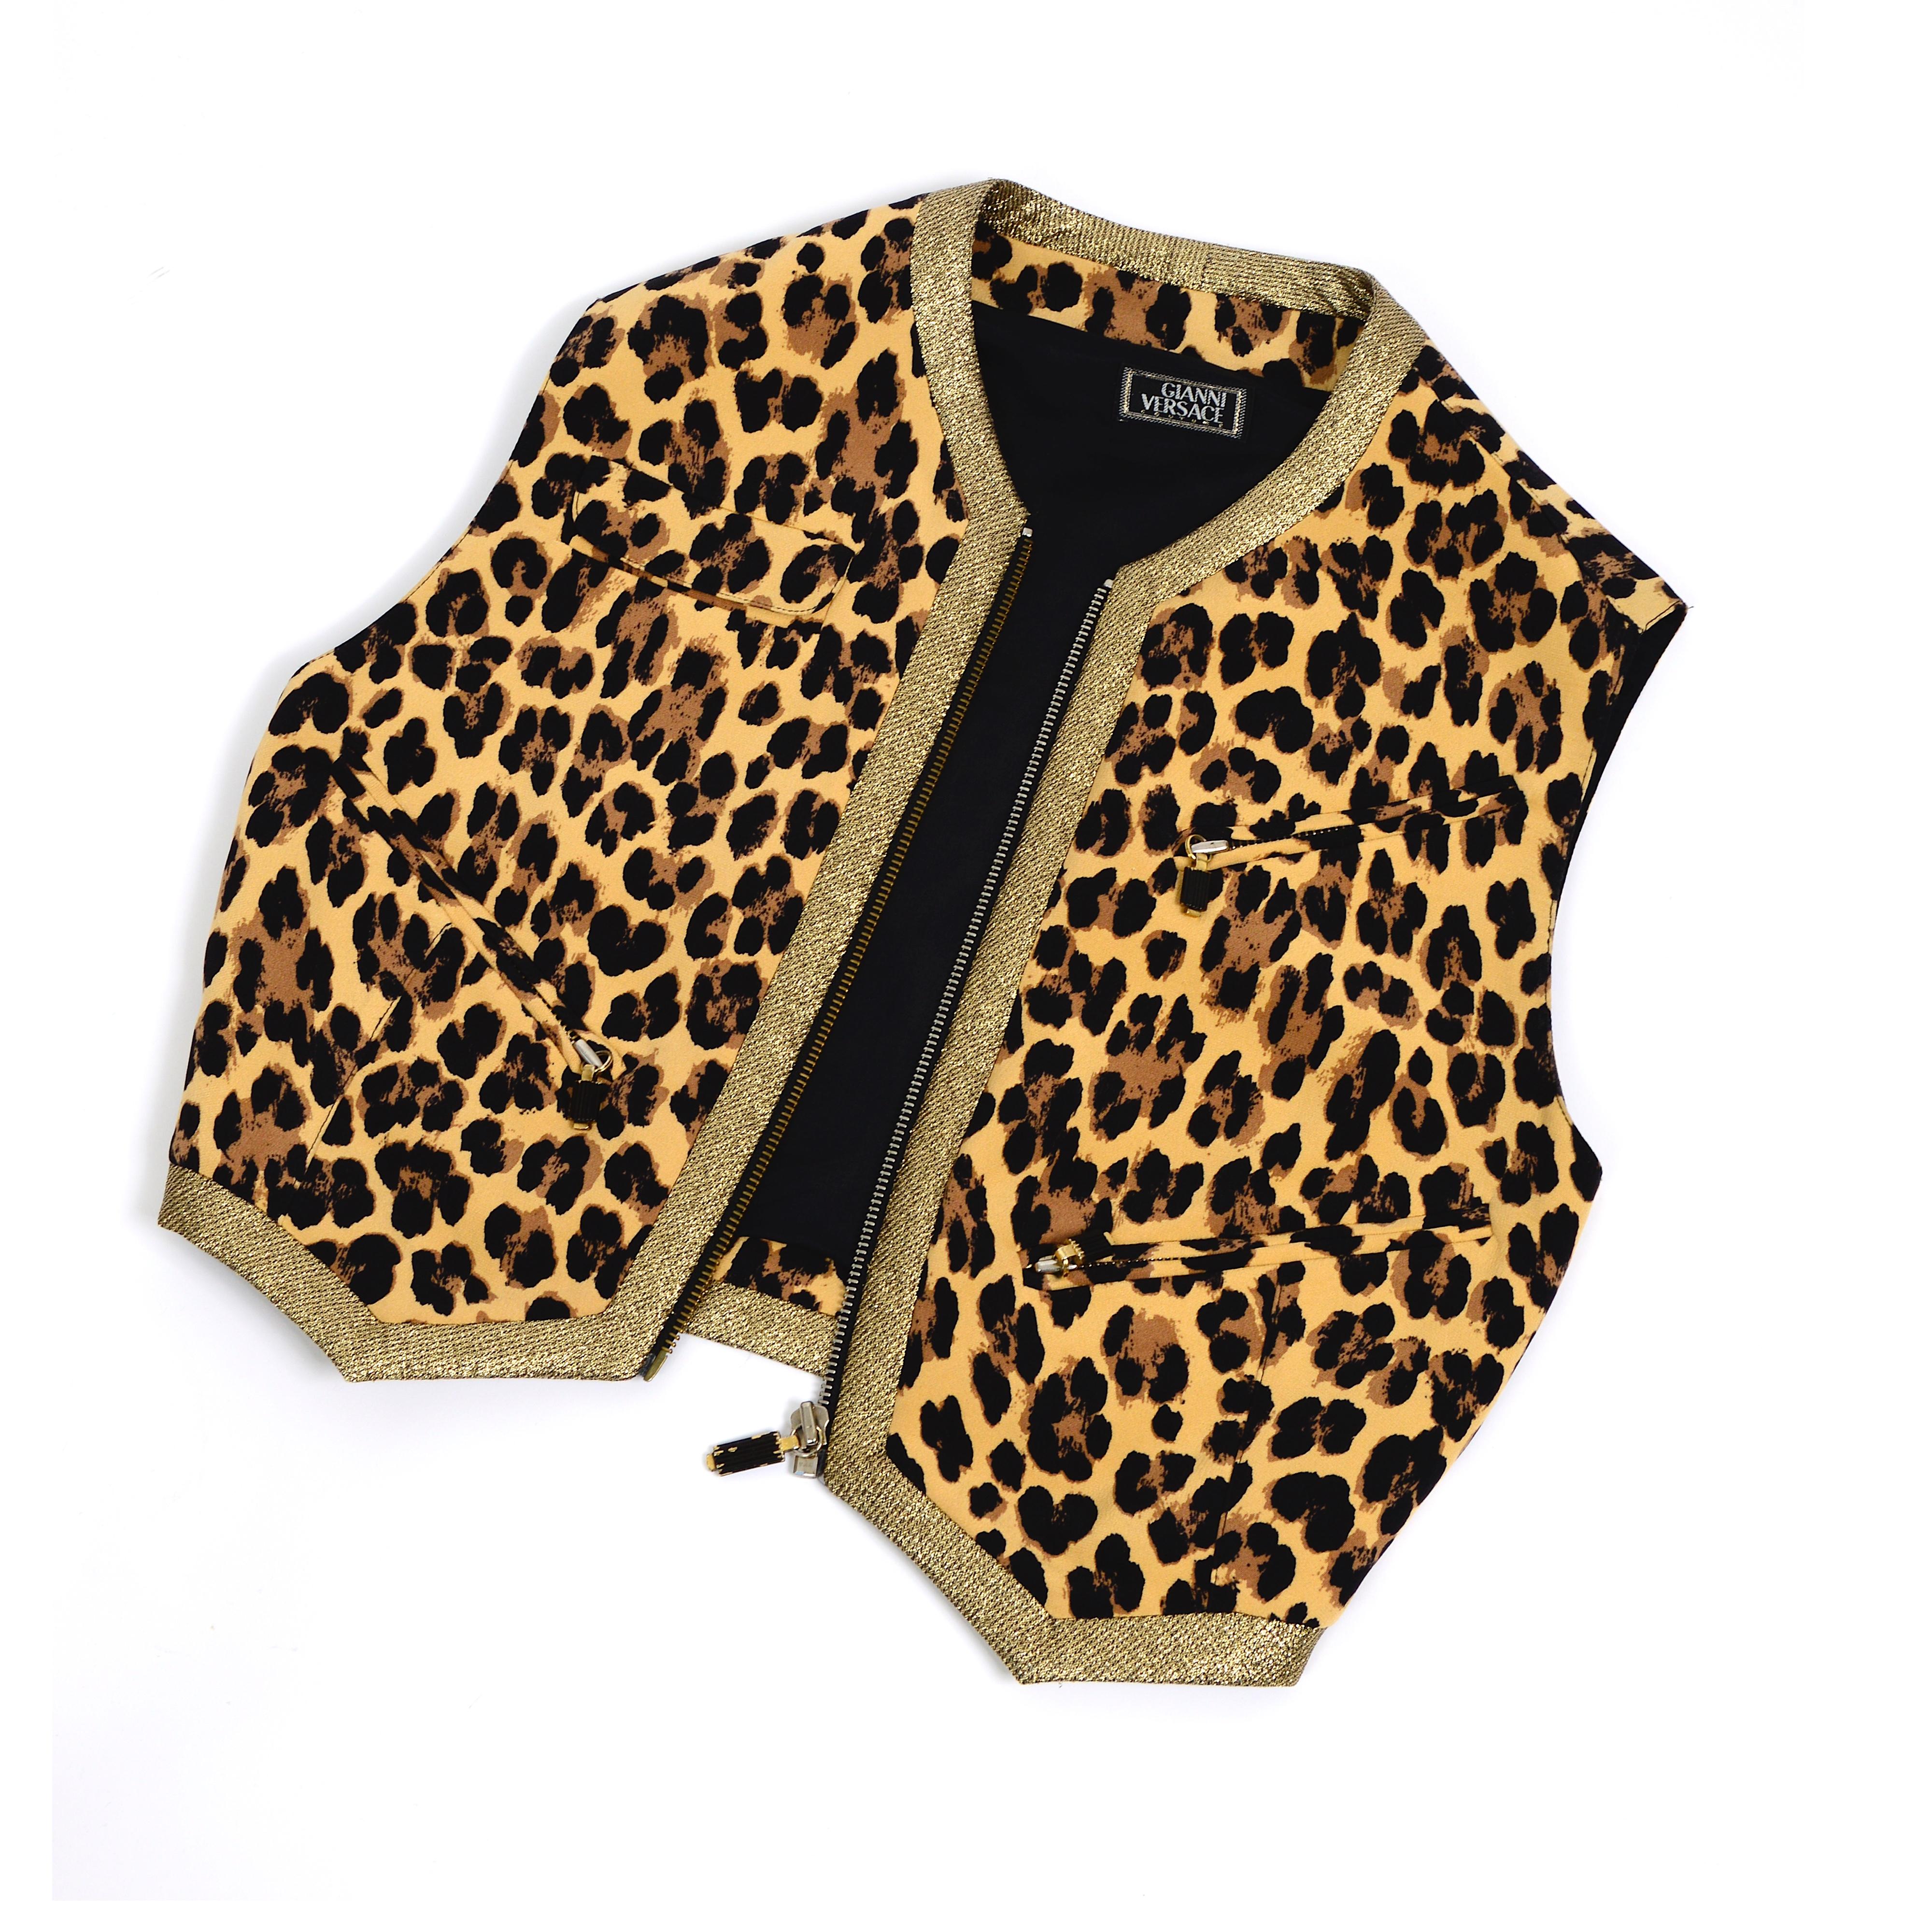 Gianni Versace couture runway SS 1992 documented silk leopard & gold lurex vest  For Sale 7